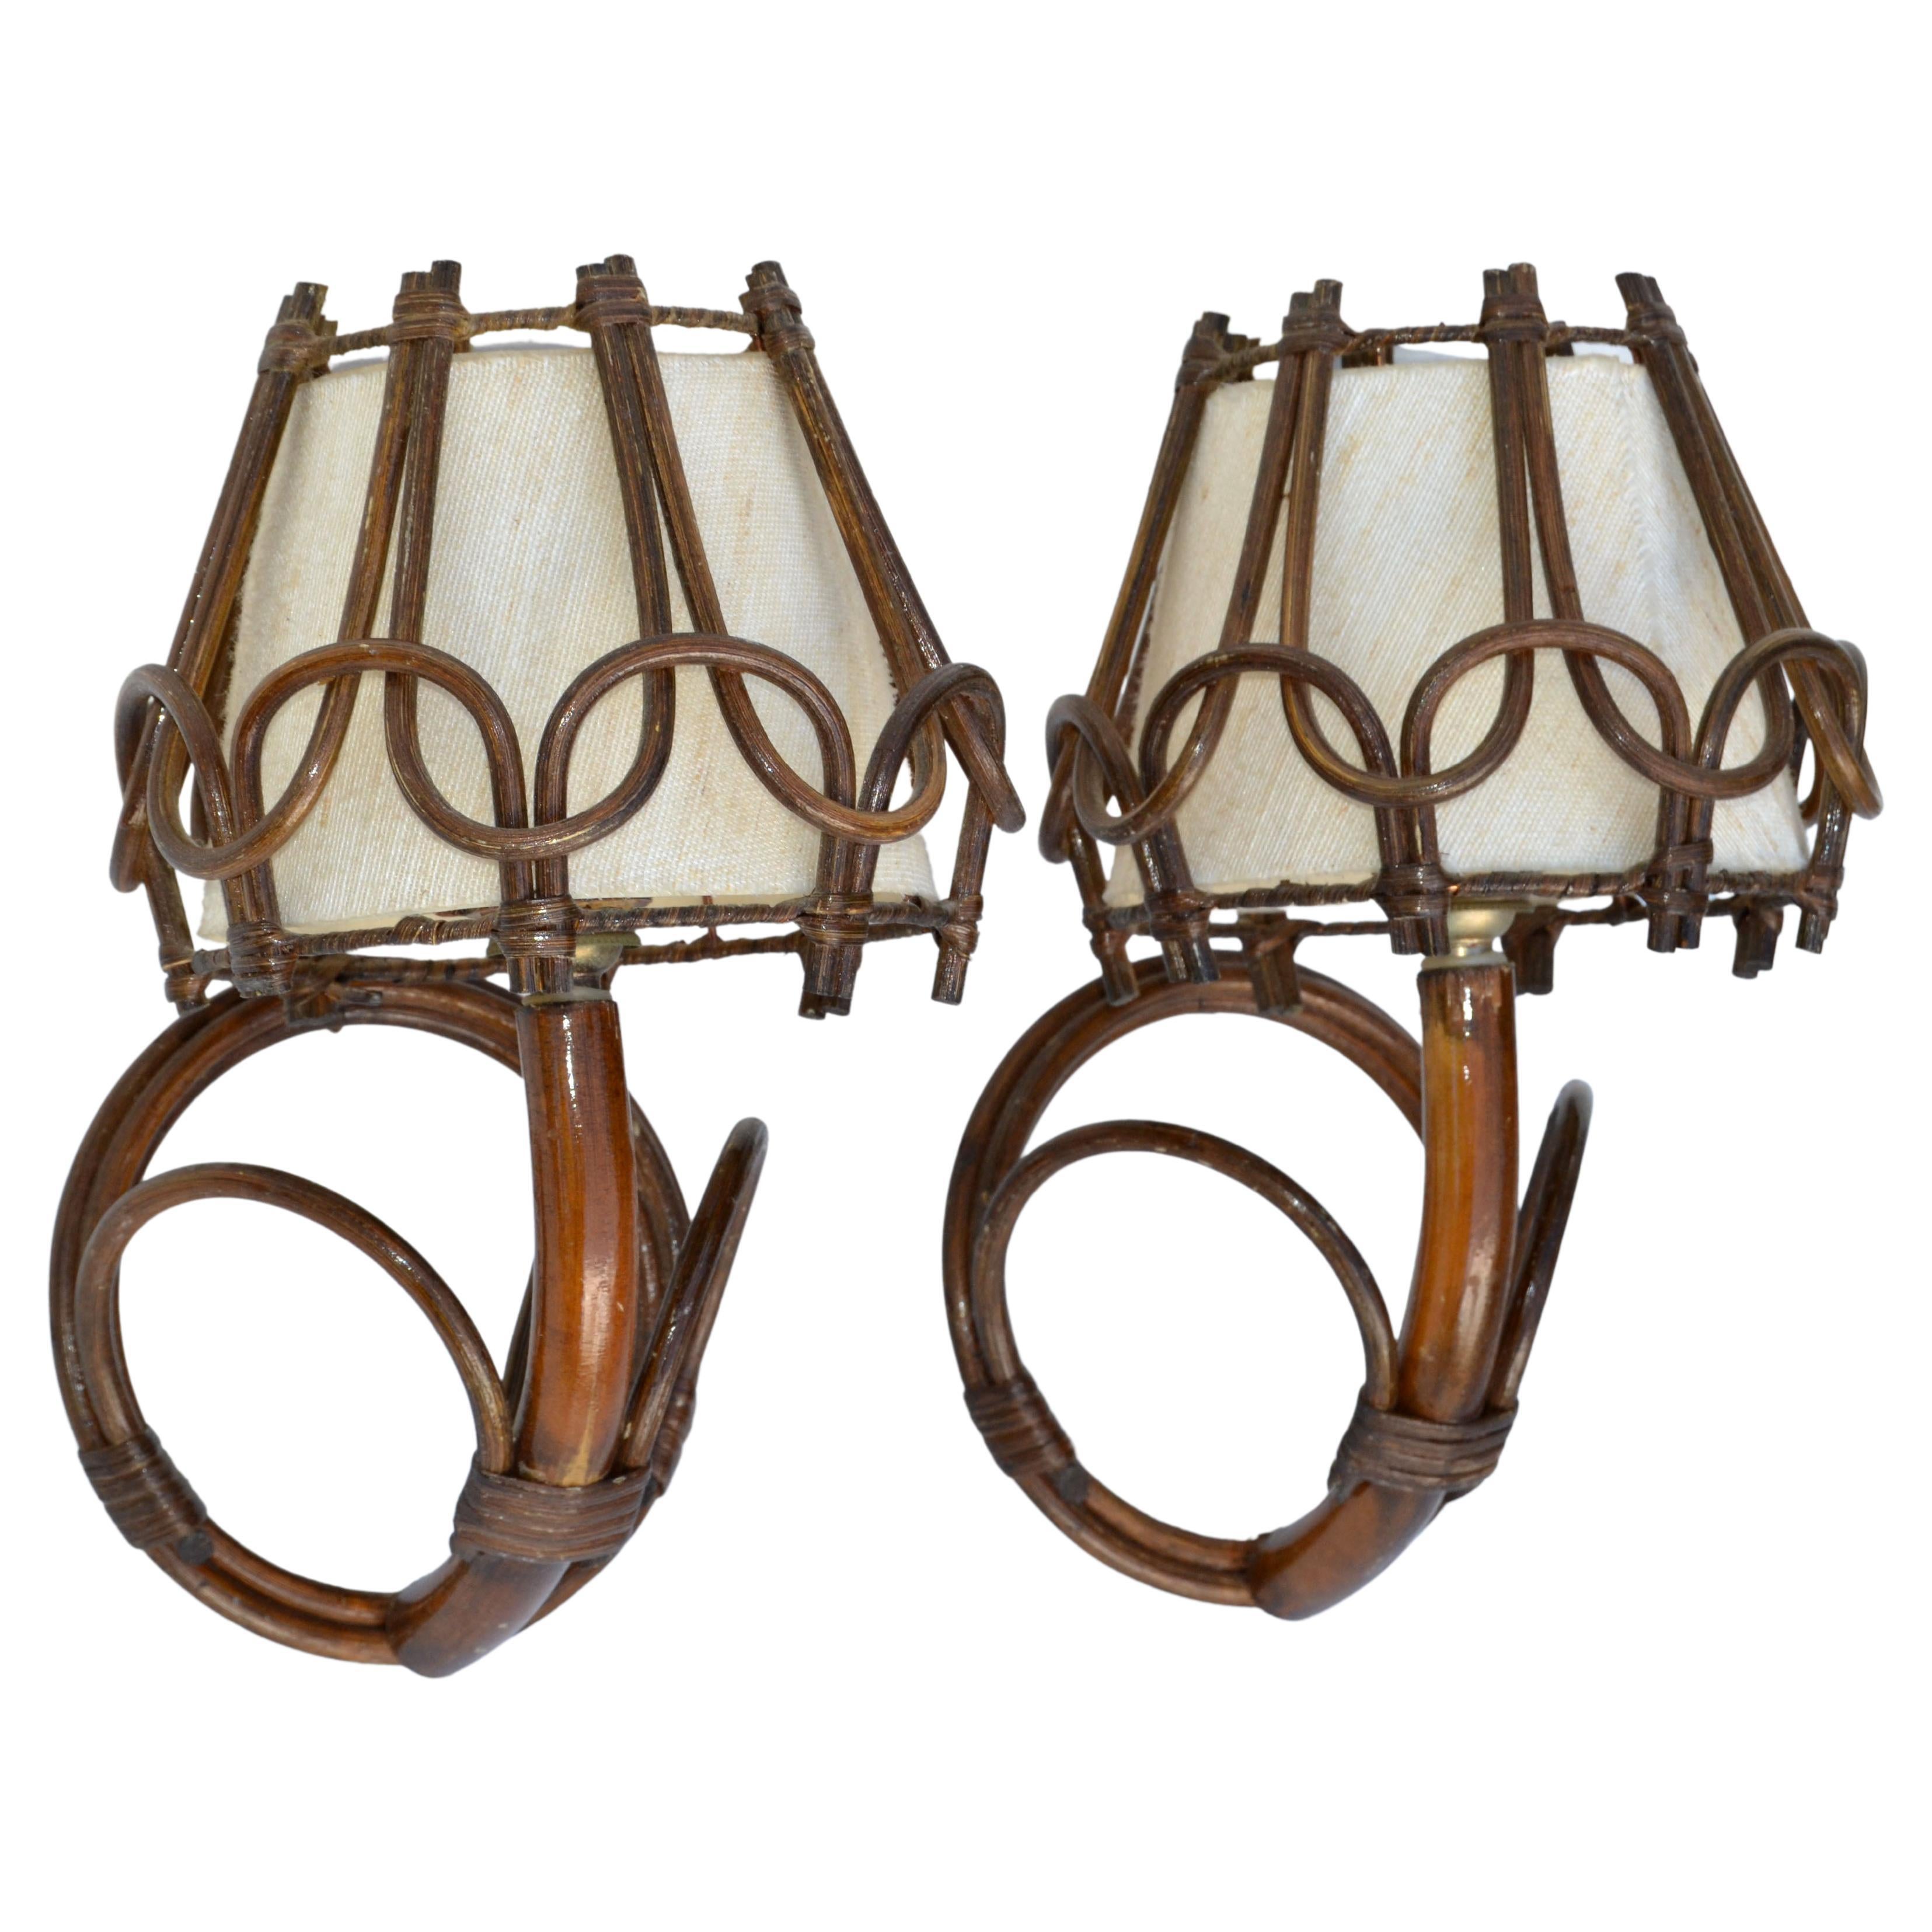 Organic Bend Bamboo Sconce Woven Bamboo Cased Fiber Shades France 1950, Pair For Sale